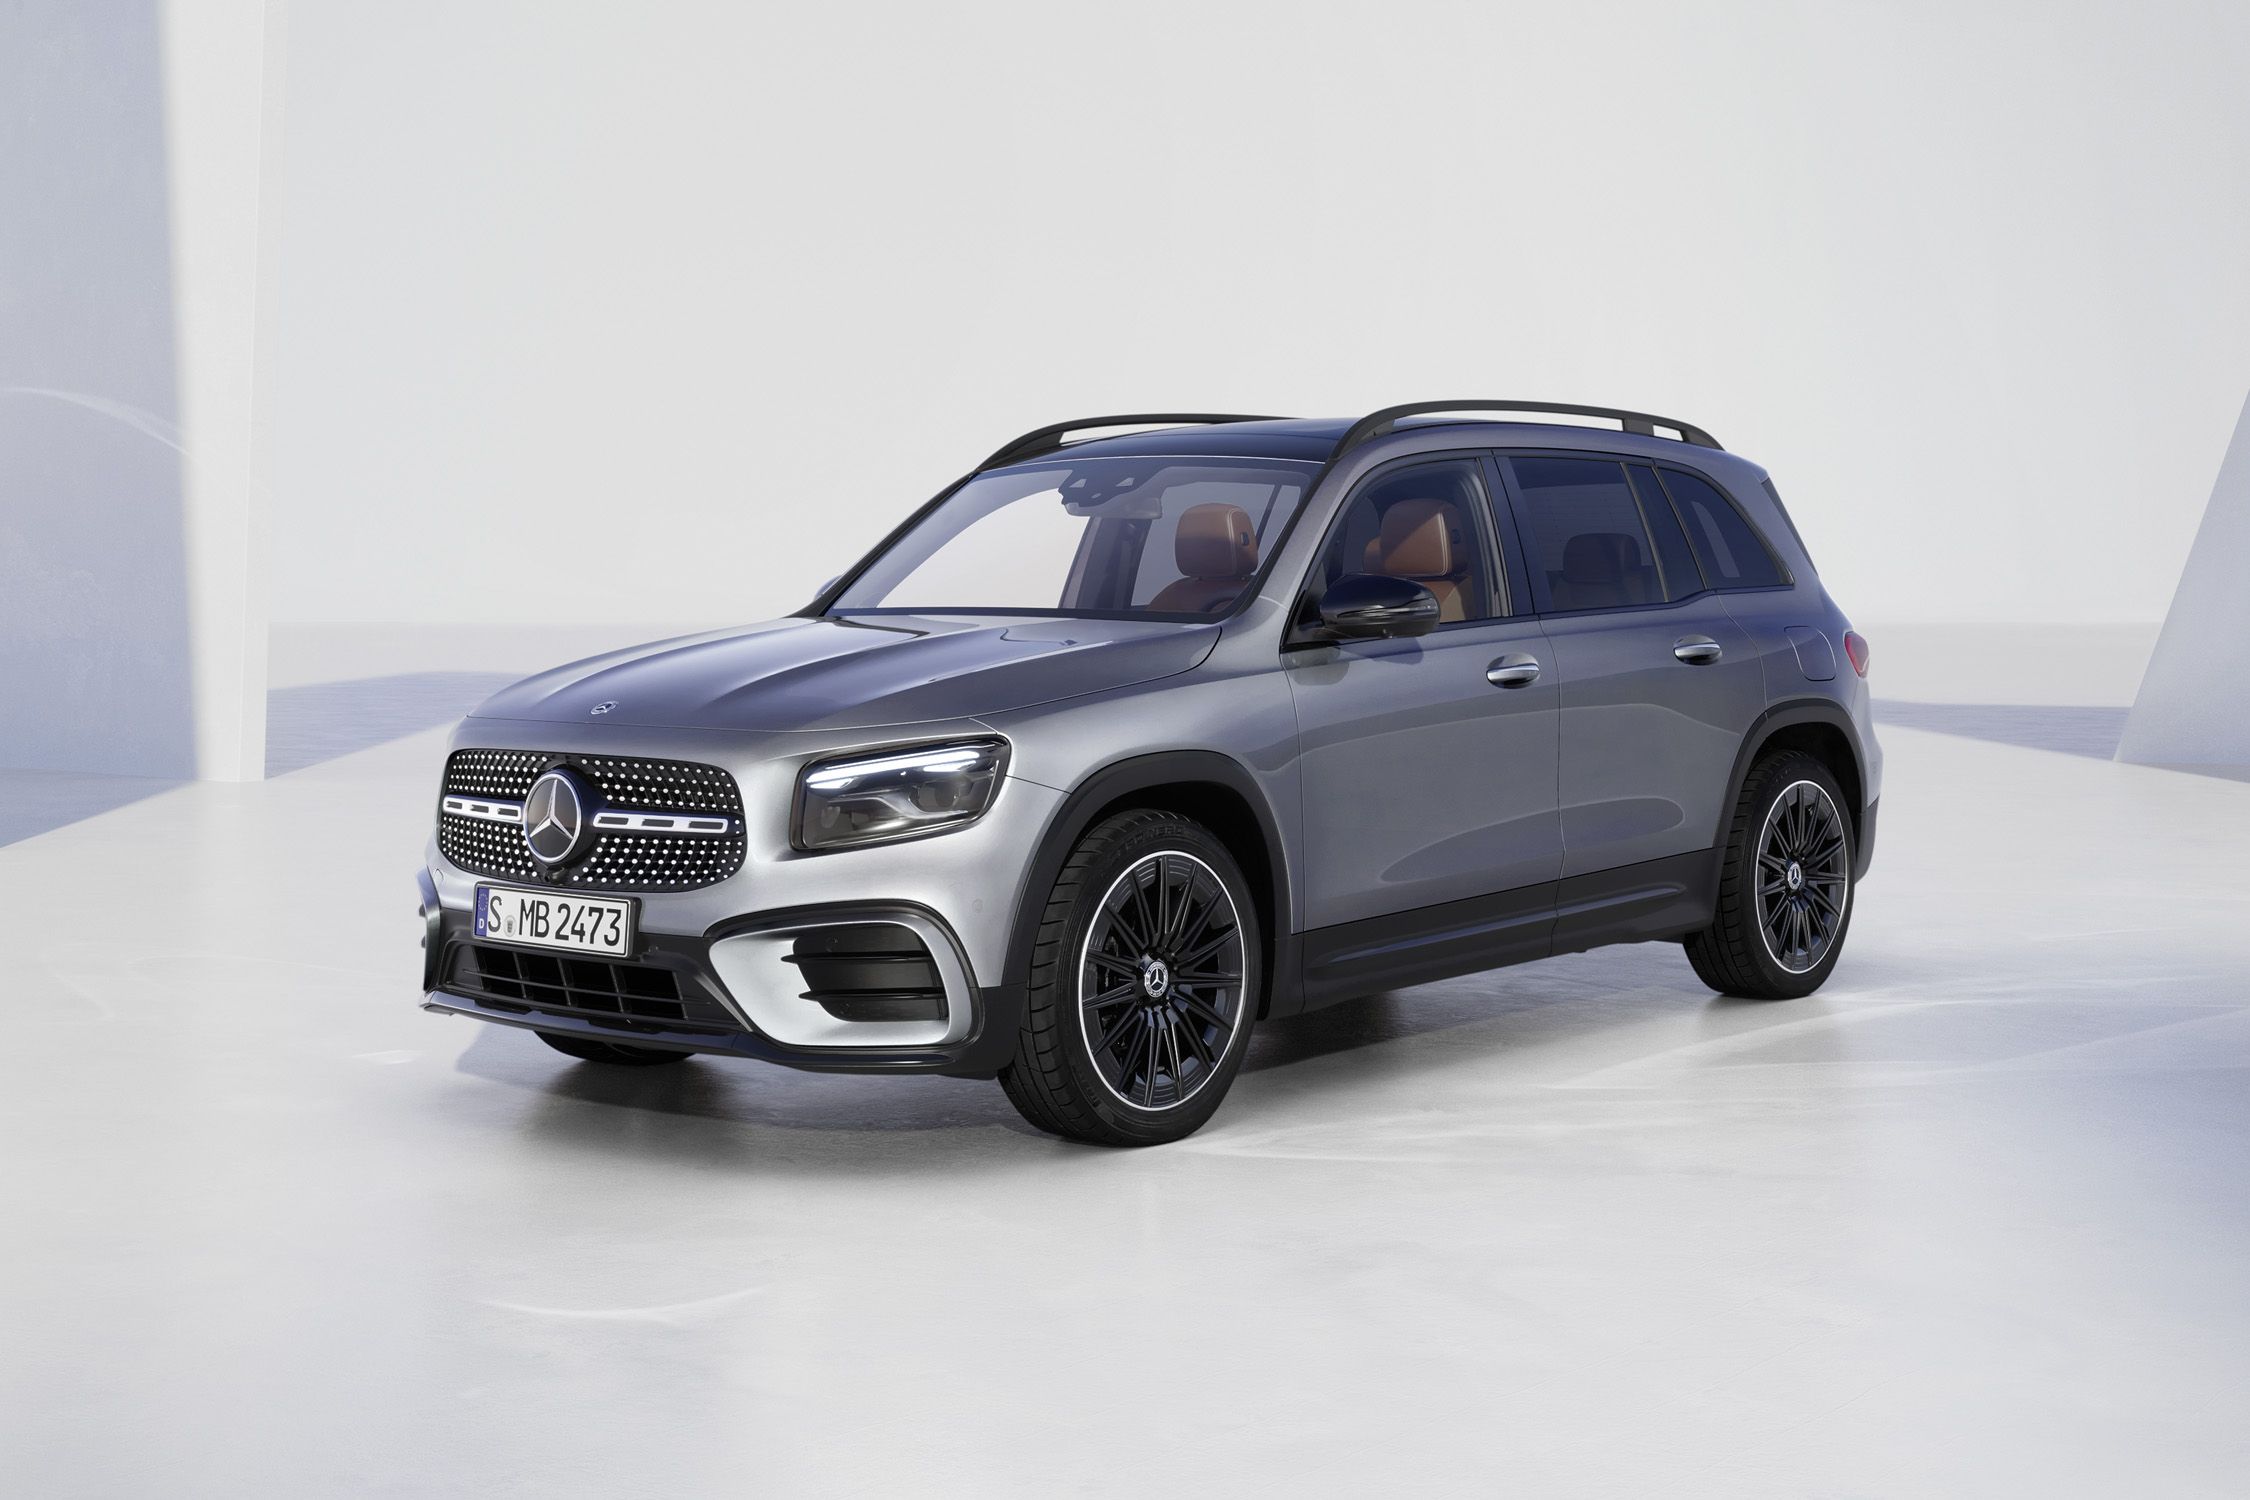 The new Mercedes GLA is now a higher-riding SUV